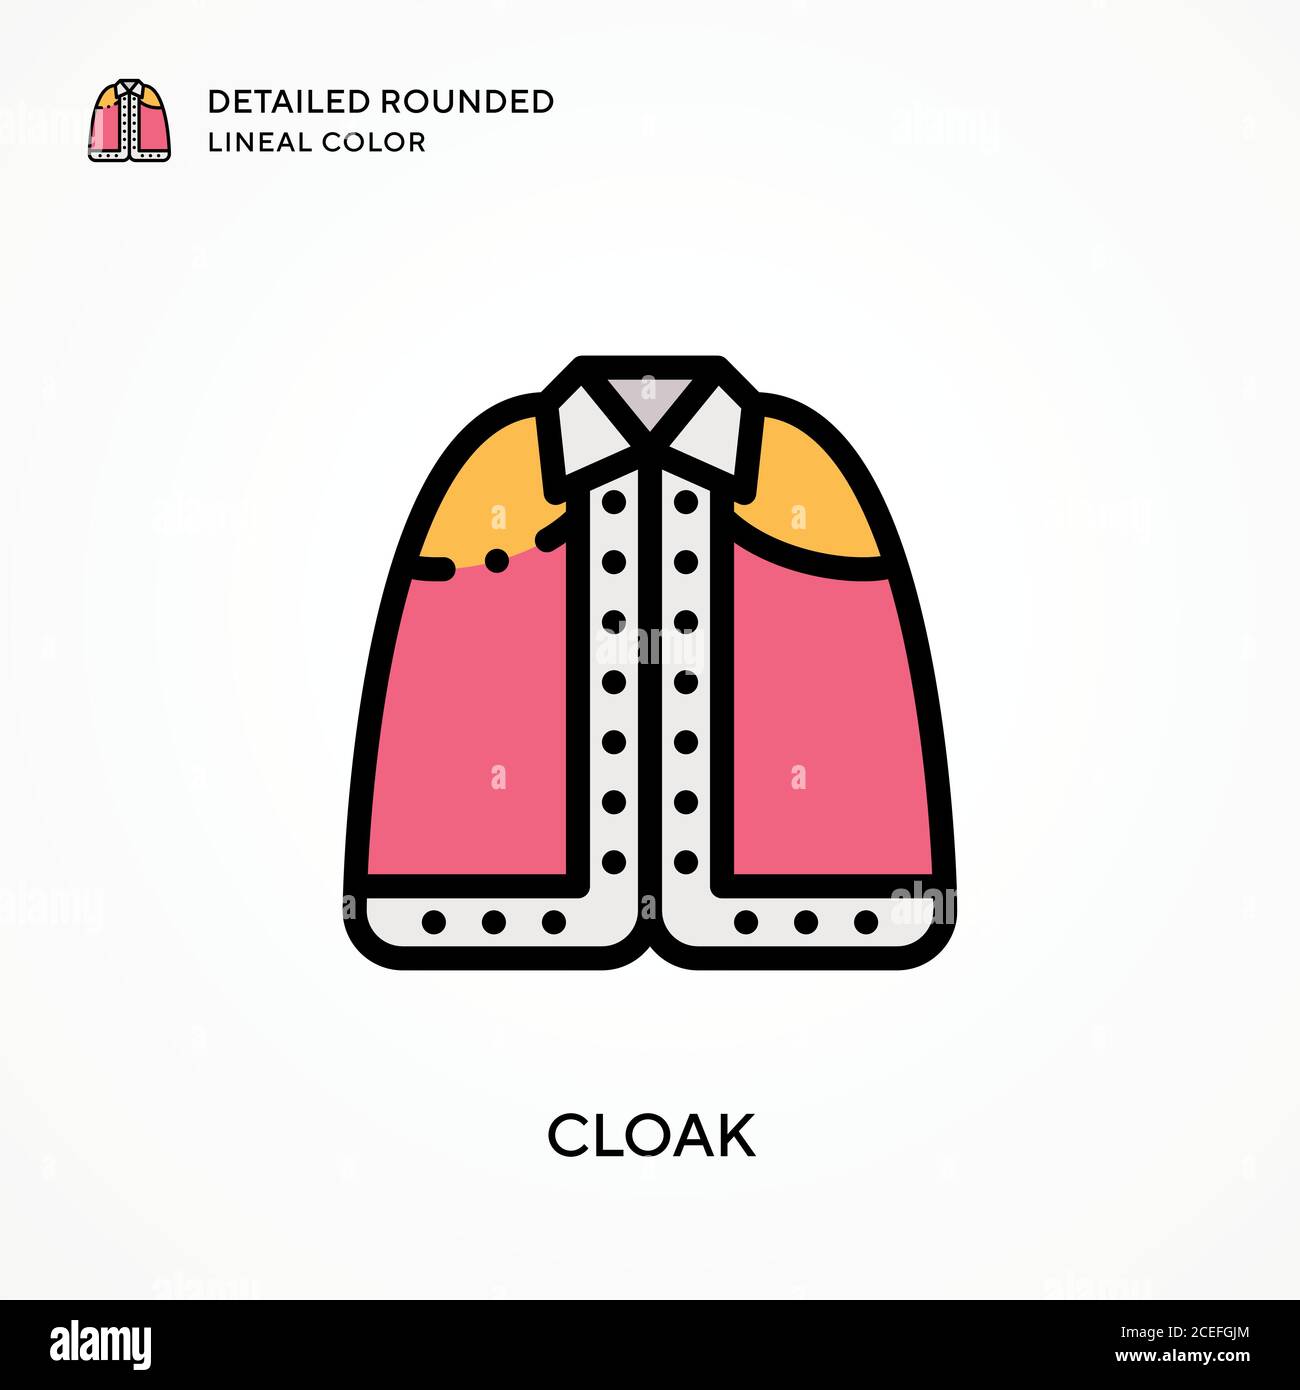 CLOAK detailed rounded lineal color. Modern vector illustration concepts. Easy to edit and customize. Stock Vector